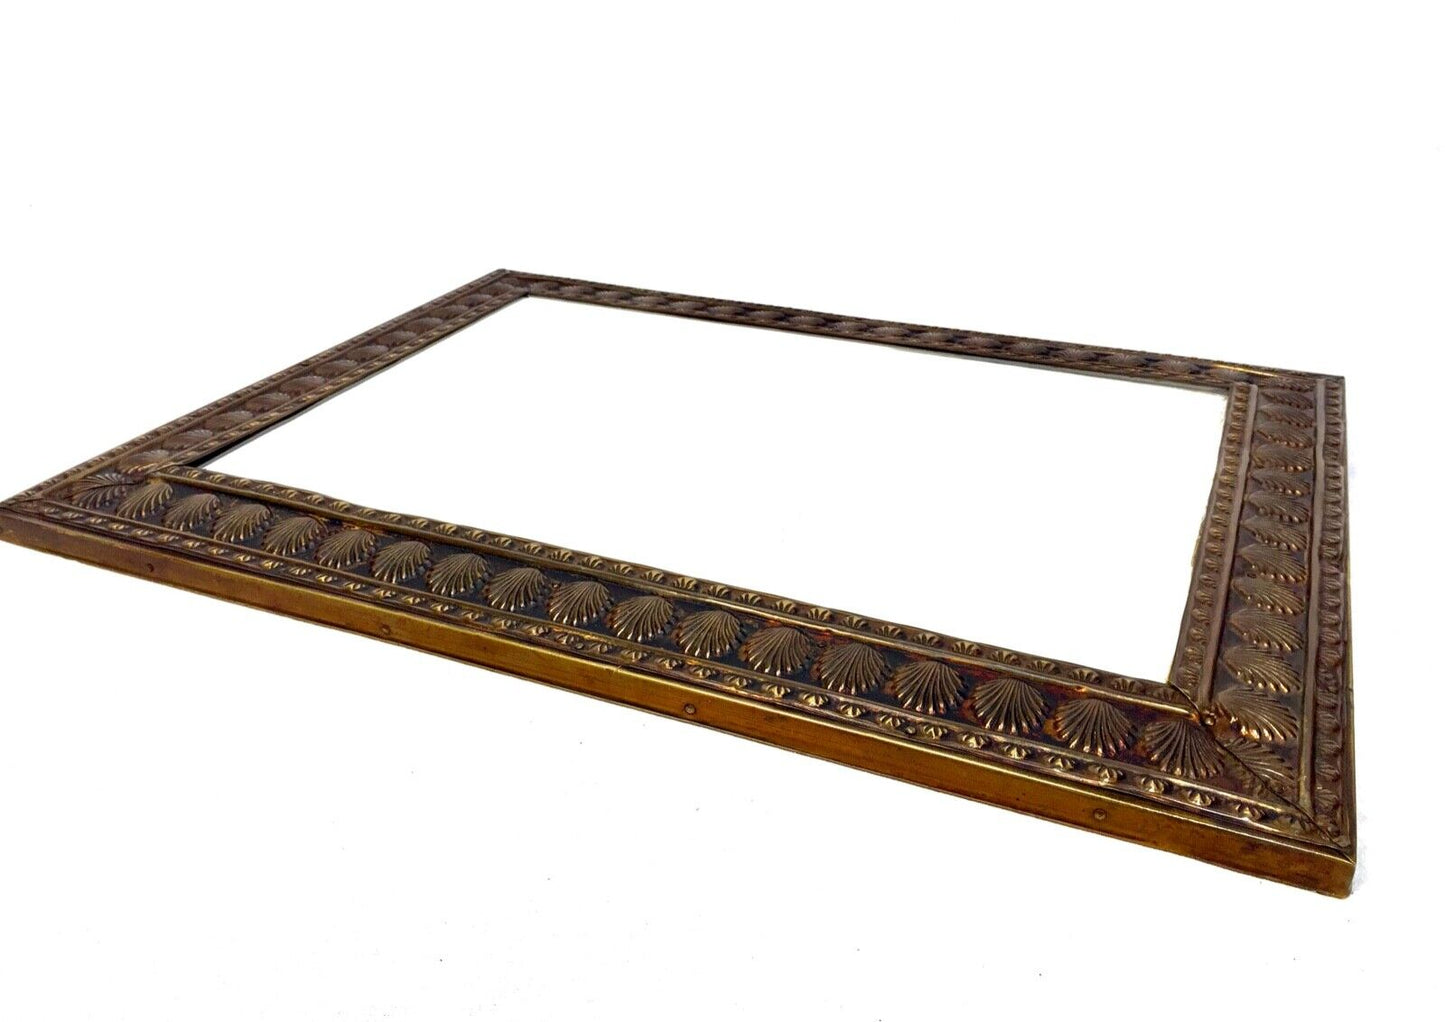 Antique Brass Framed Wall Hanging Mirror / Art Nouveau Style / 20th Century